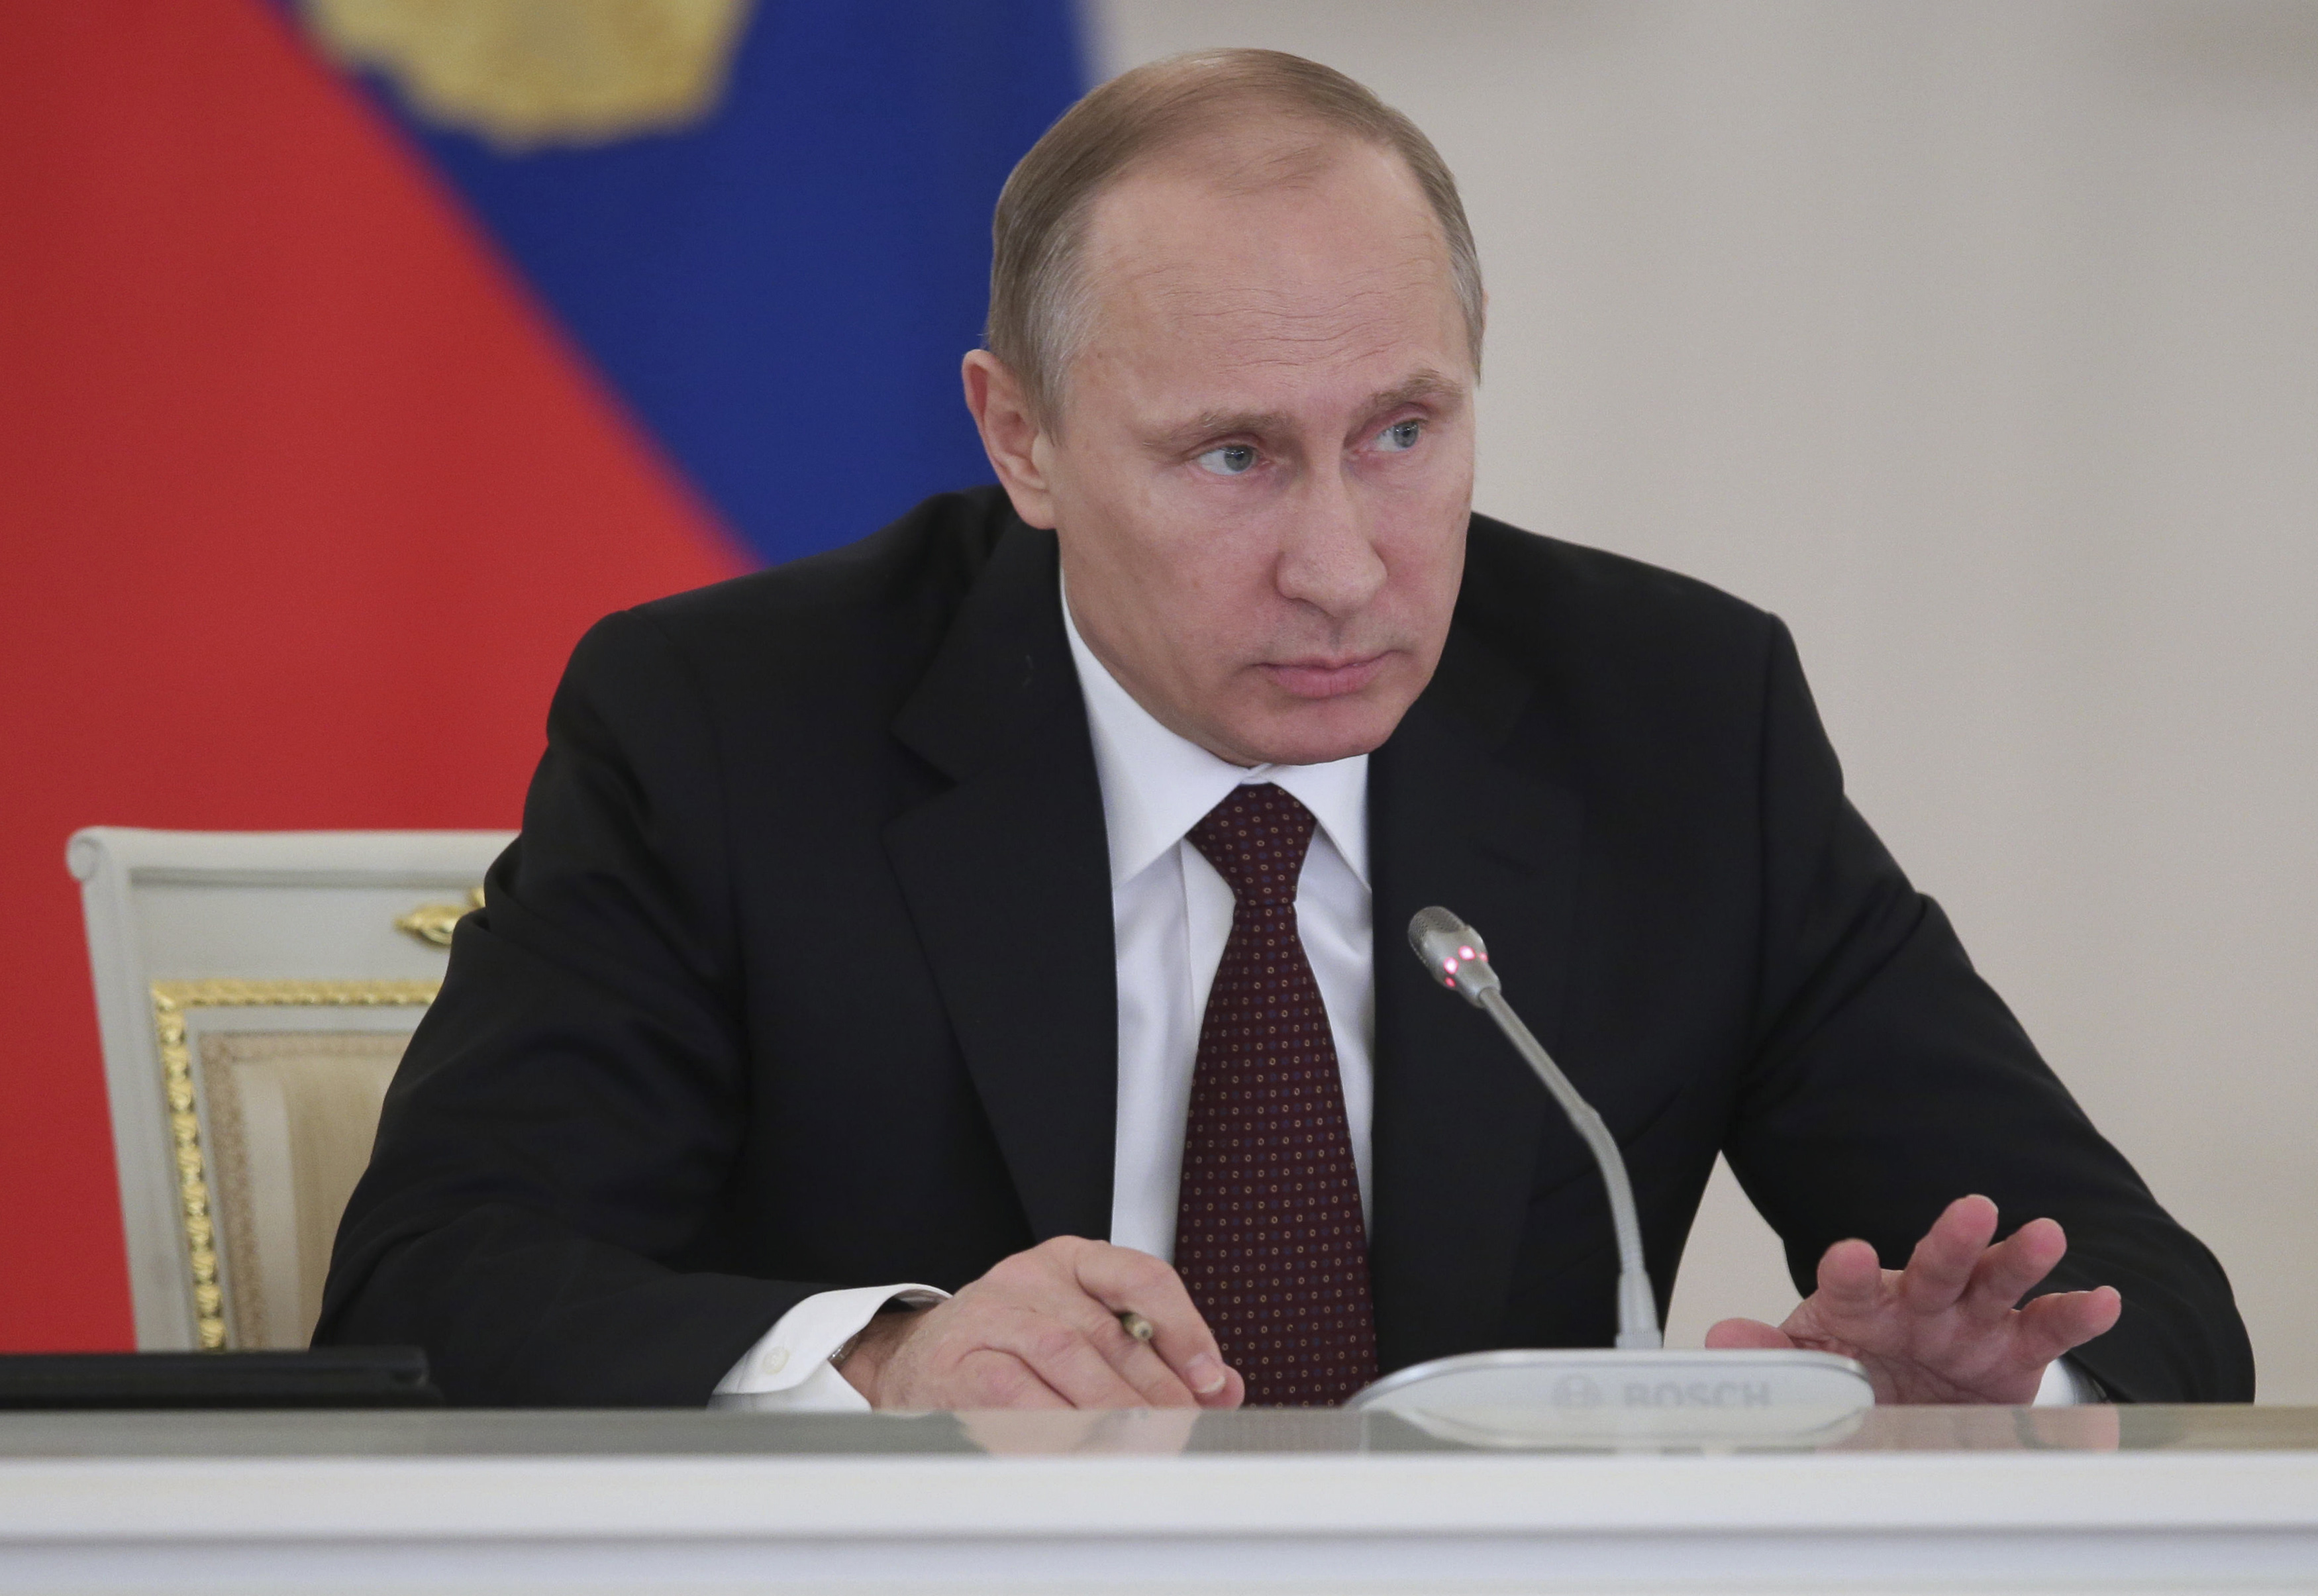 Russian President Putin takes part in a meeting on social and economic development in Moscow's Kremlin